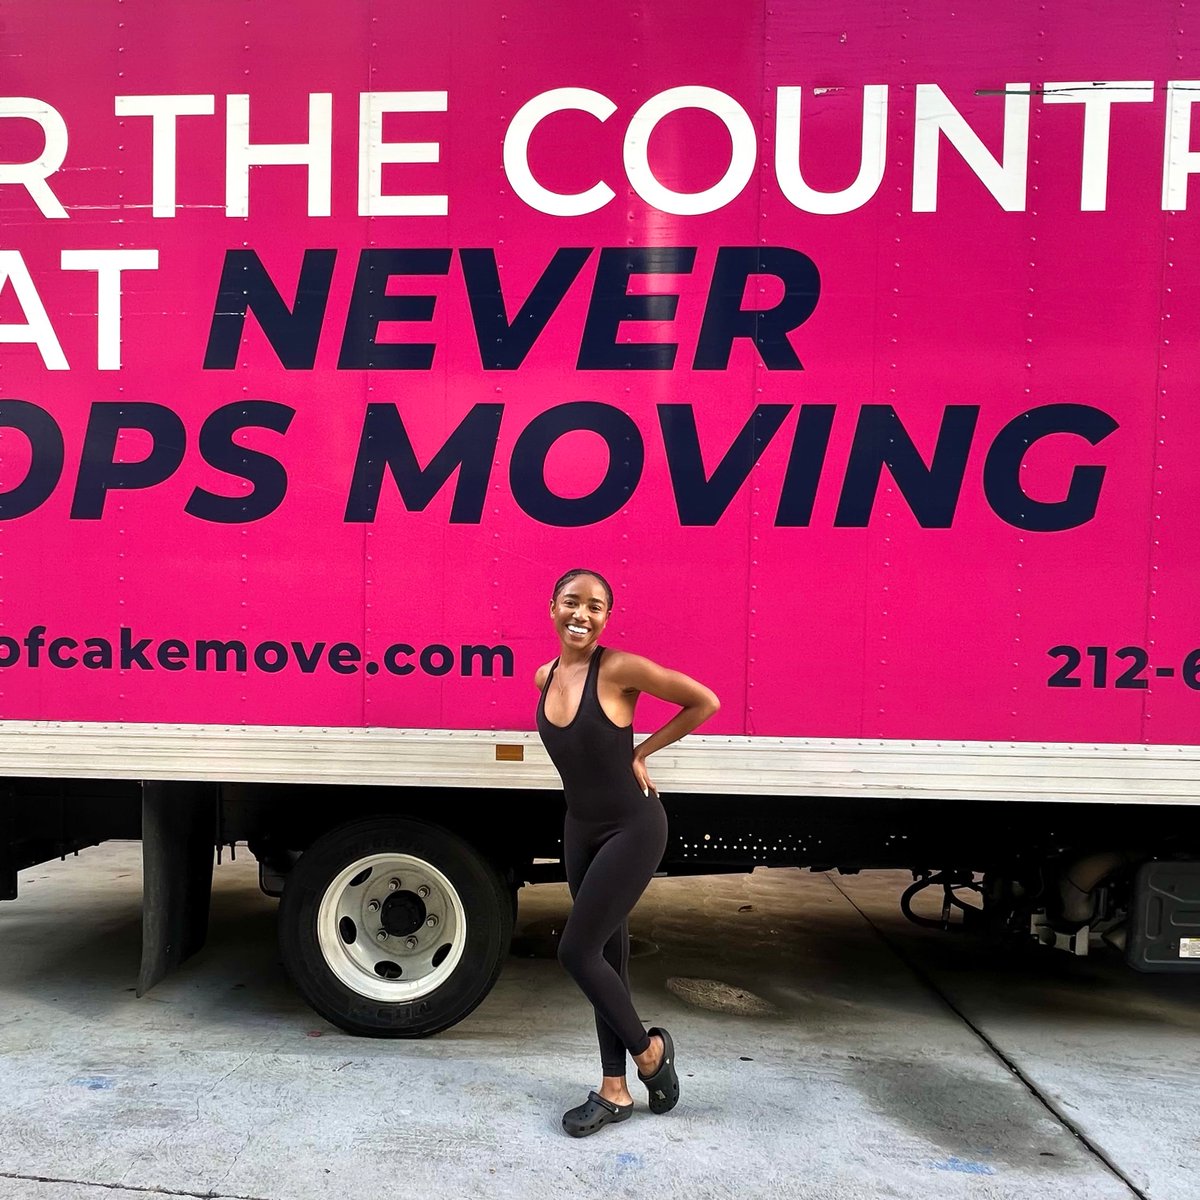 Did you know we can move you to any state in the USA? Make your next long distance move  🍰 @funndippp

#longdistancemove #crosscountrymove #moving #movingtips #movingnyc #nycmovers #mypieceofcakemove #localmovers #nyc #pieceofcakemoving #storagenyc #nycmovingcompany